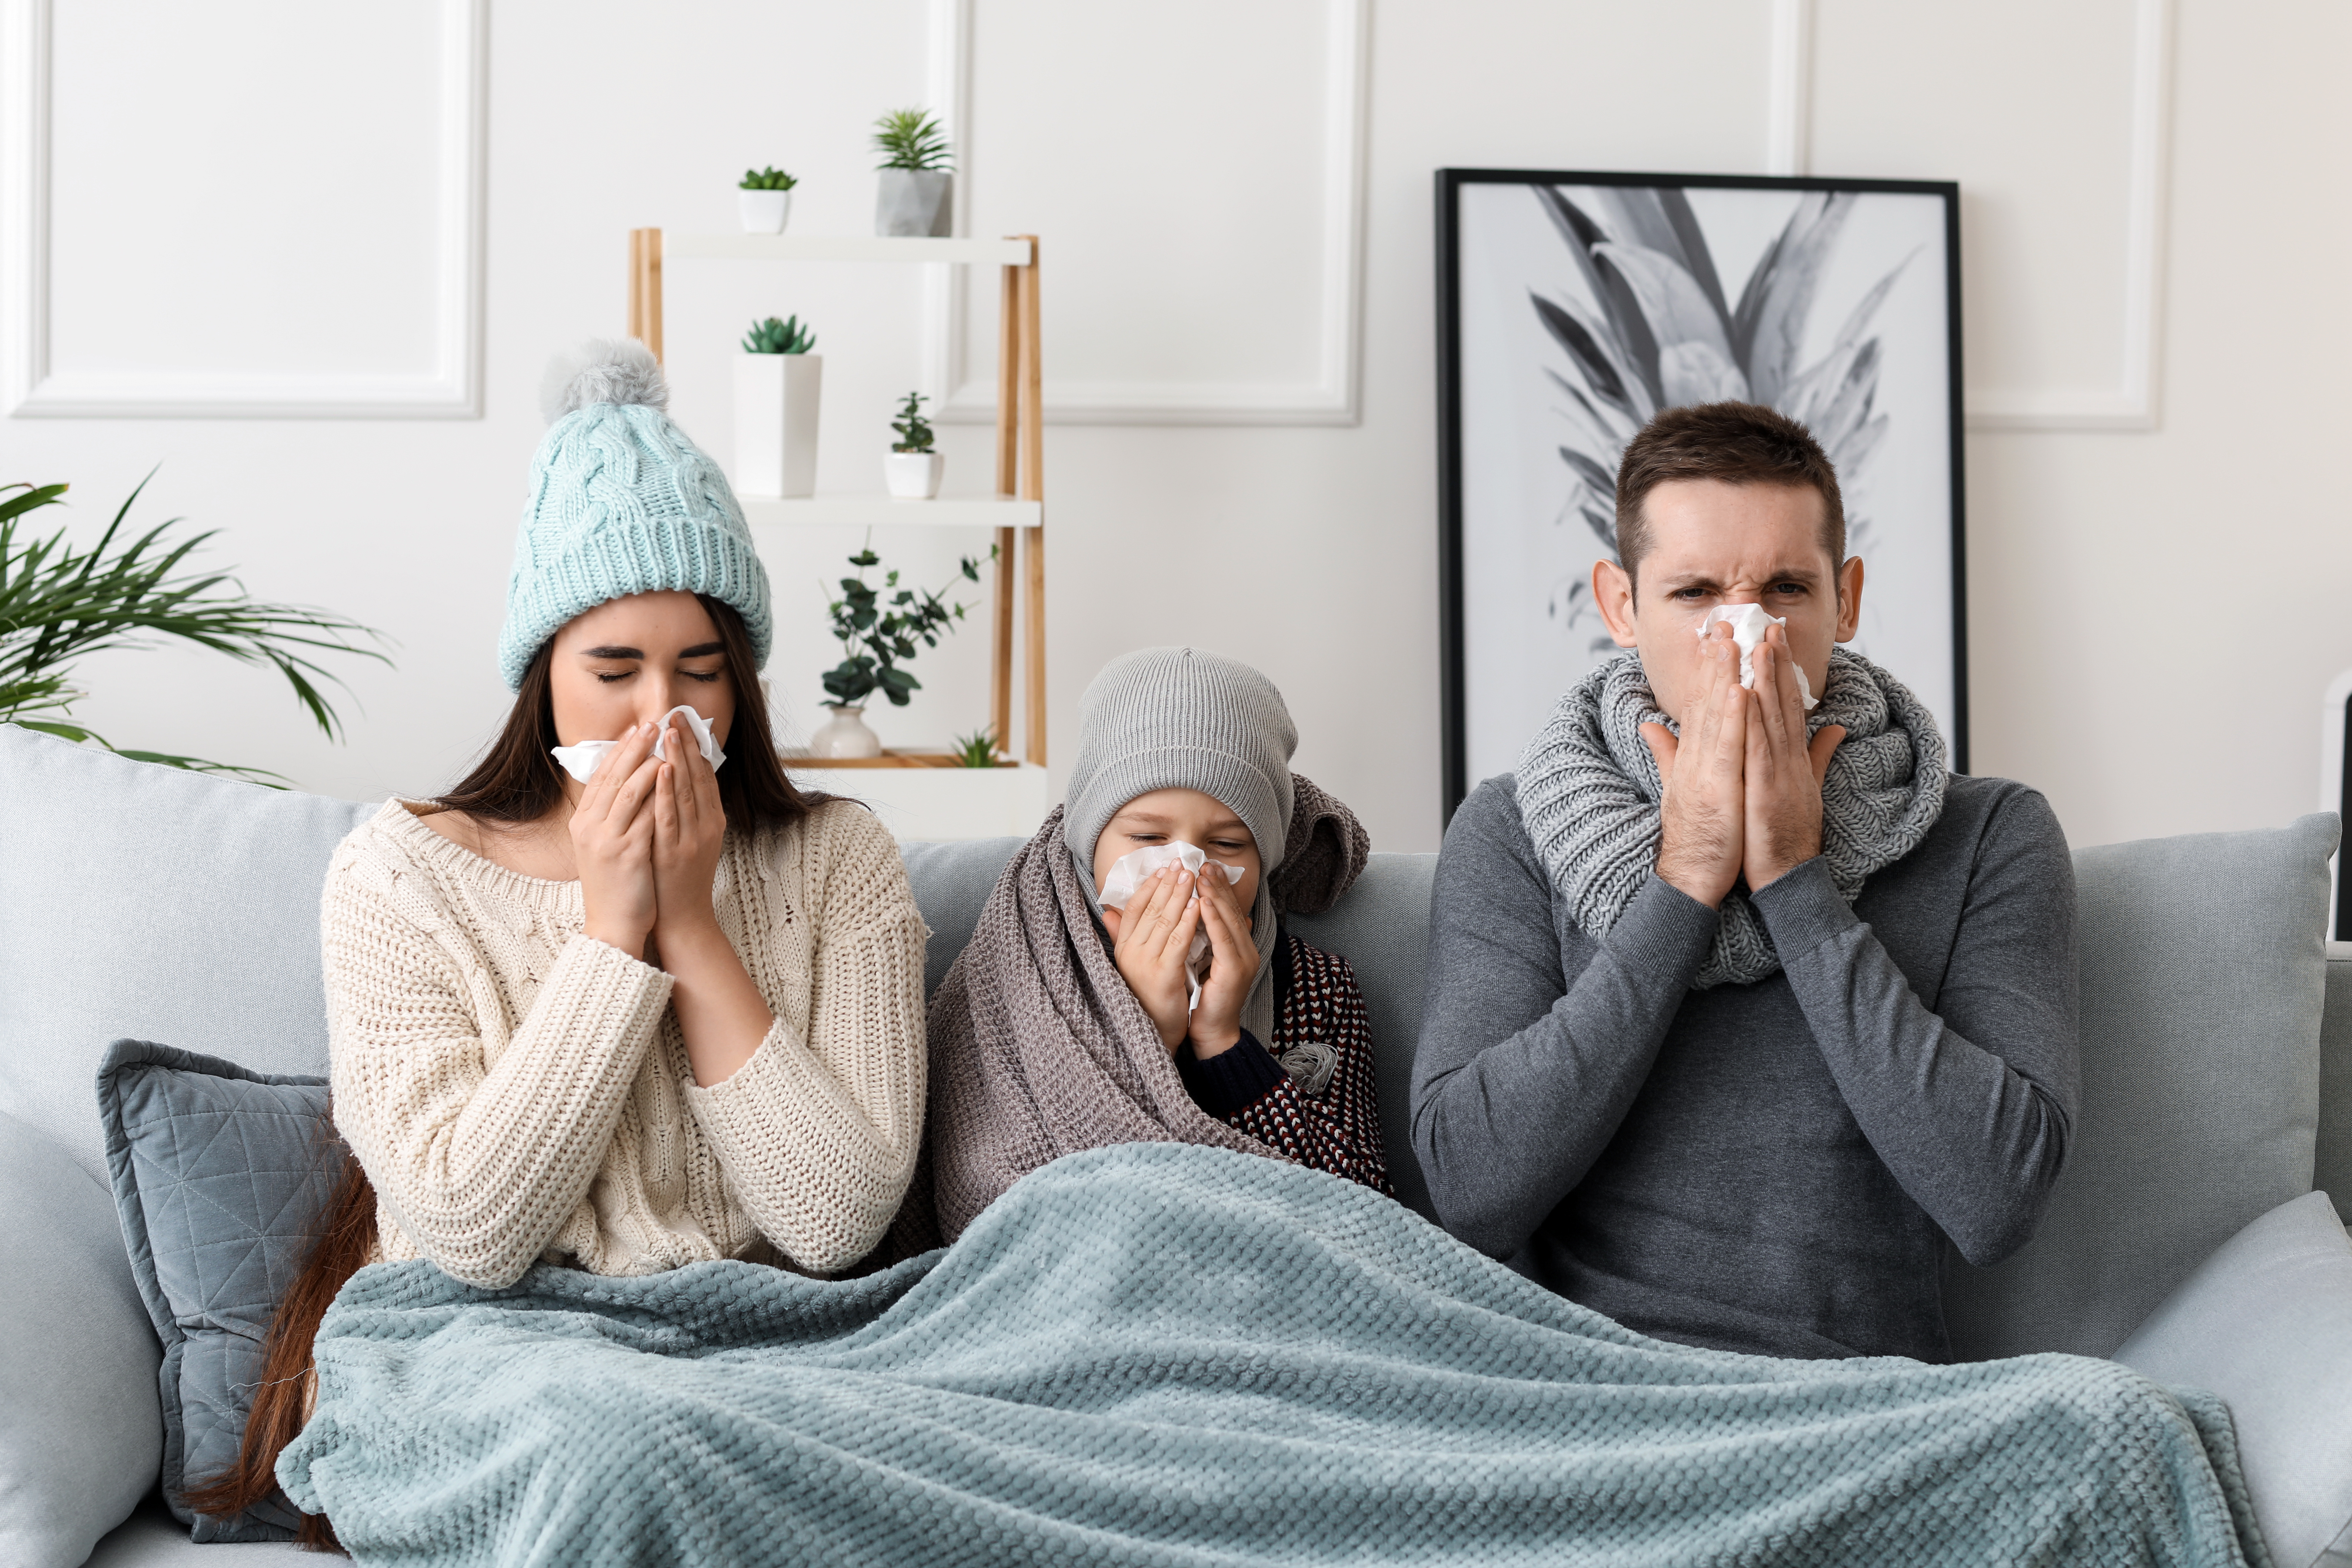 How Different Is The Covid 19 From The Common Flu?